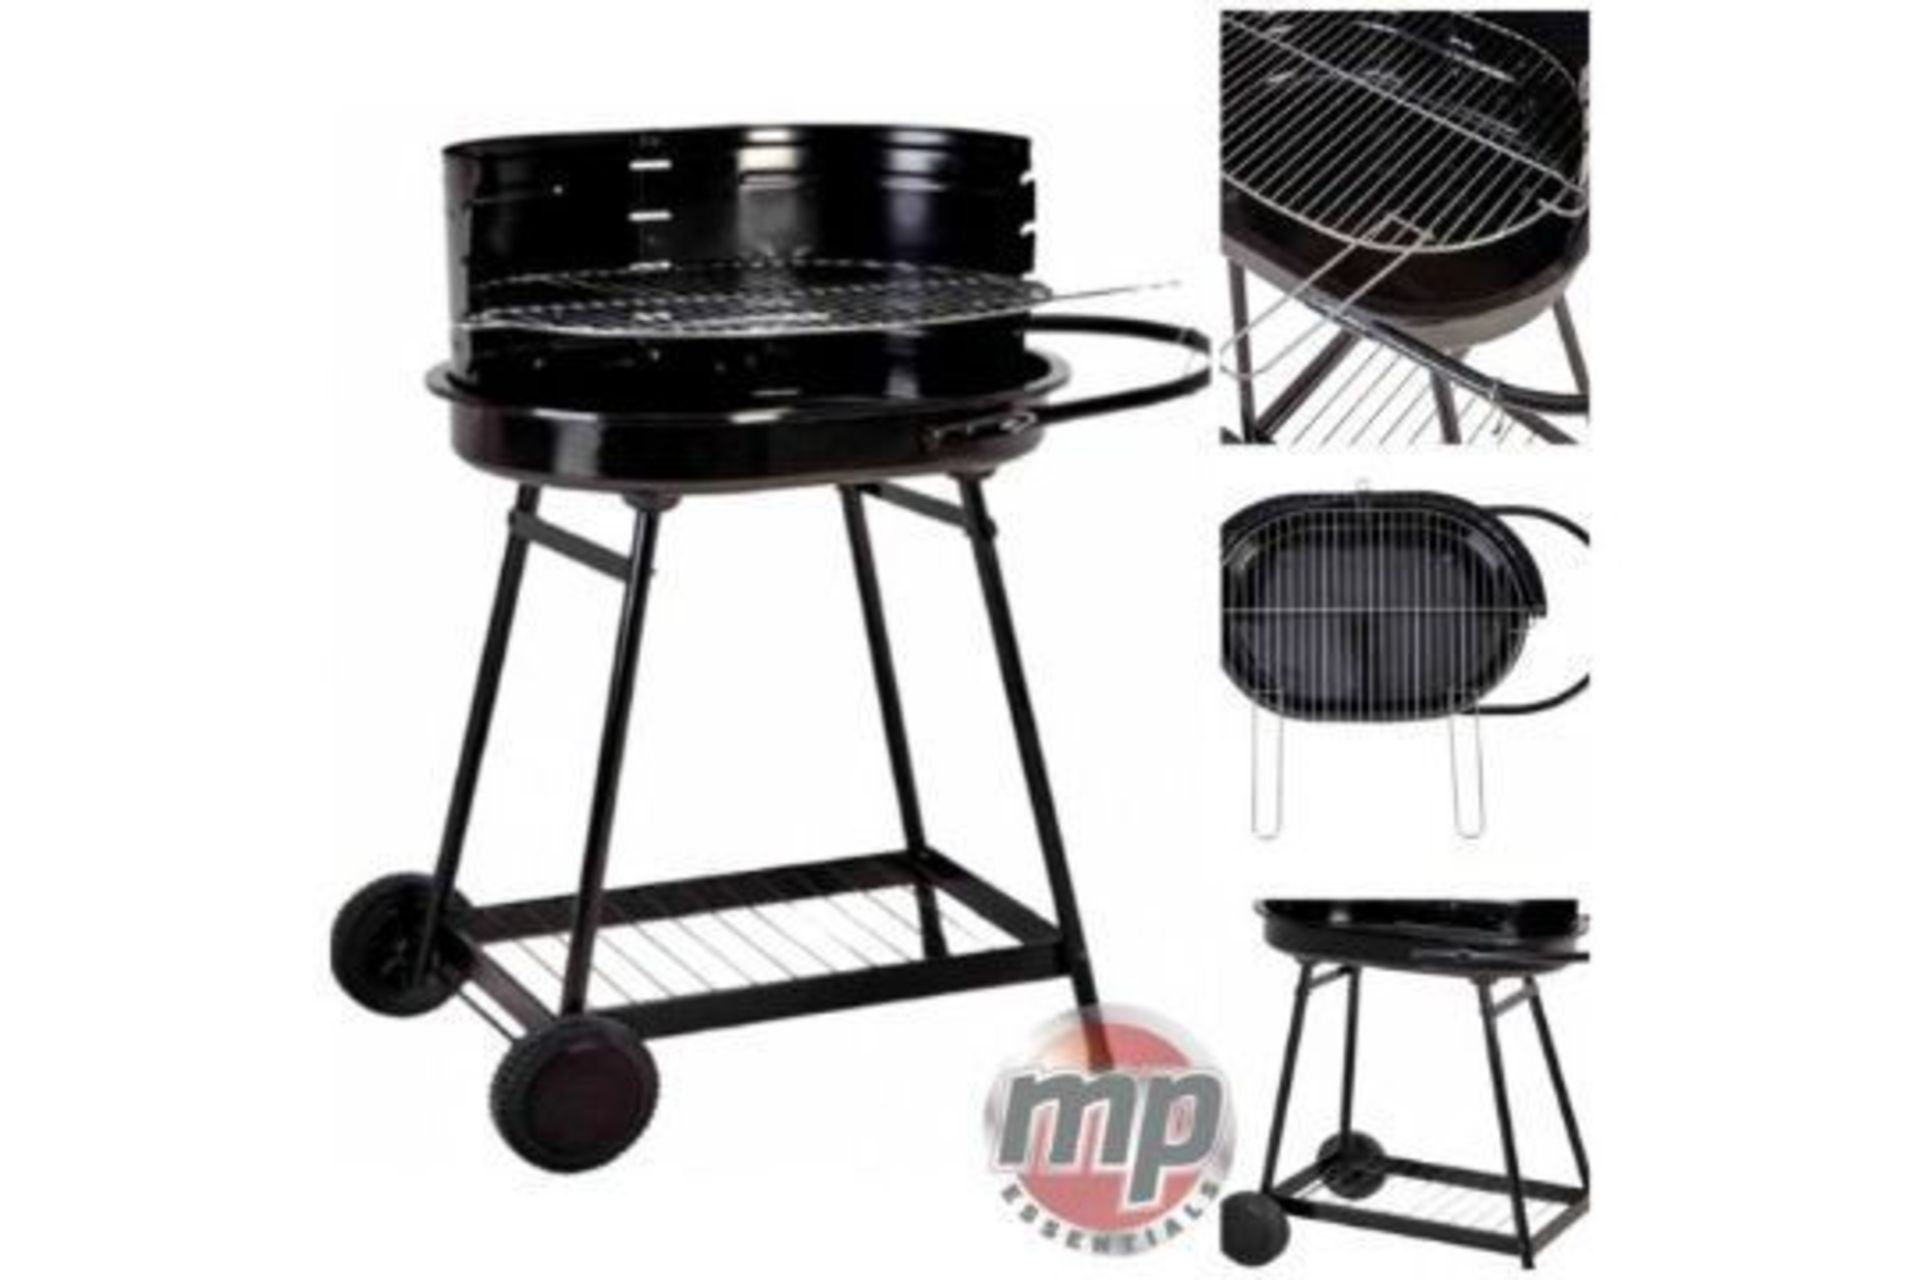 10 X BRAND NEW BOXED BARREN PORTABLE CHARCOAL TROLLEY BARBEQUE OUTDOOR GRILL WITH WHEELS BLACK